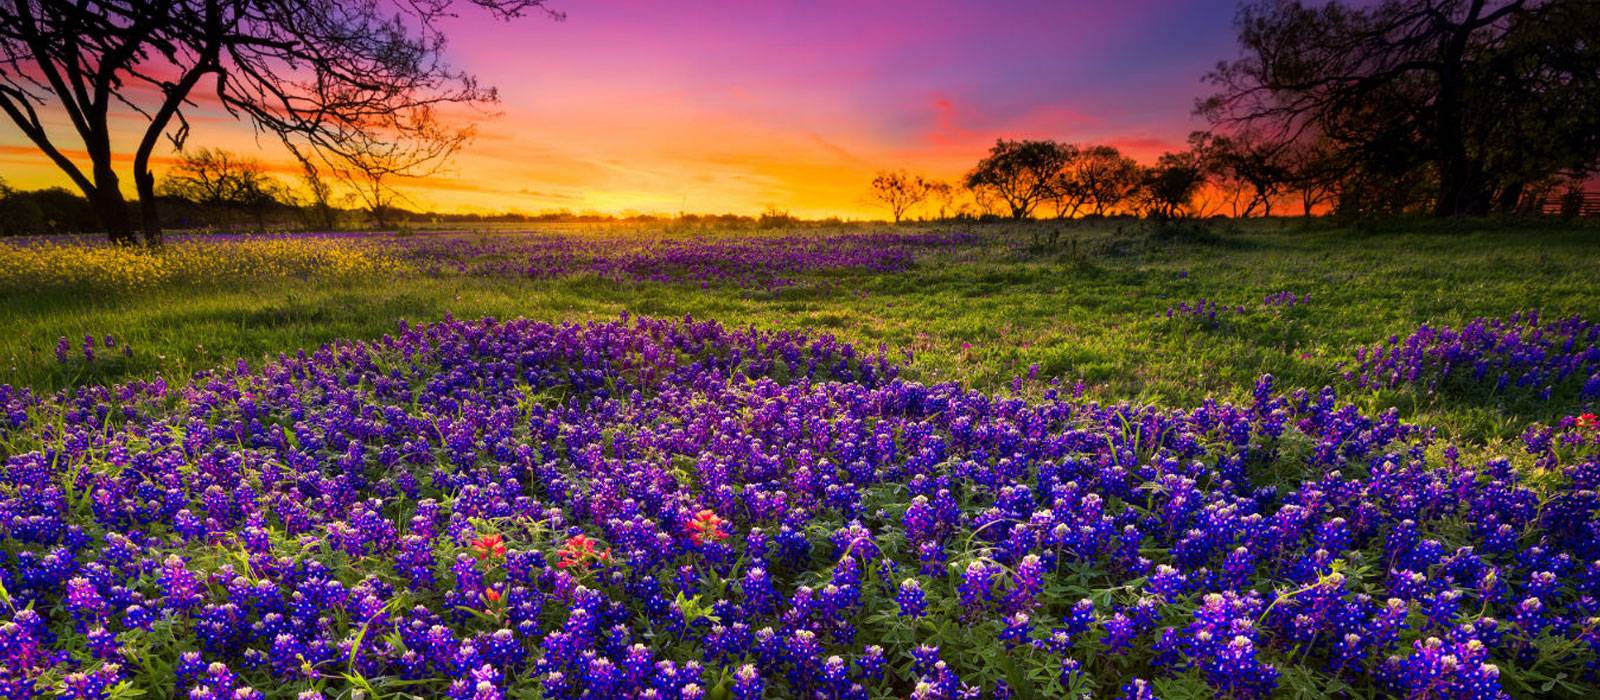 Flowers and sunset